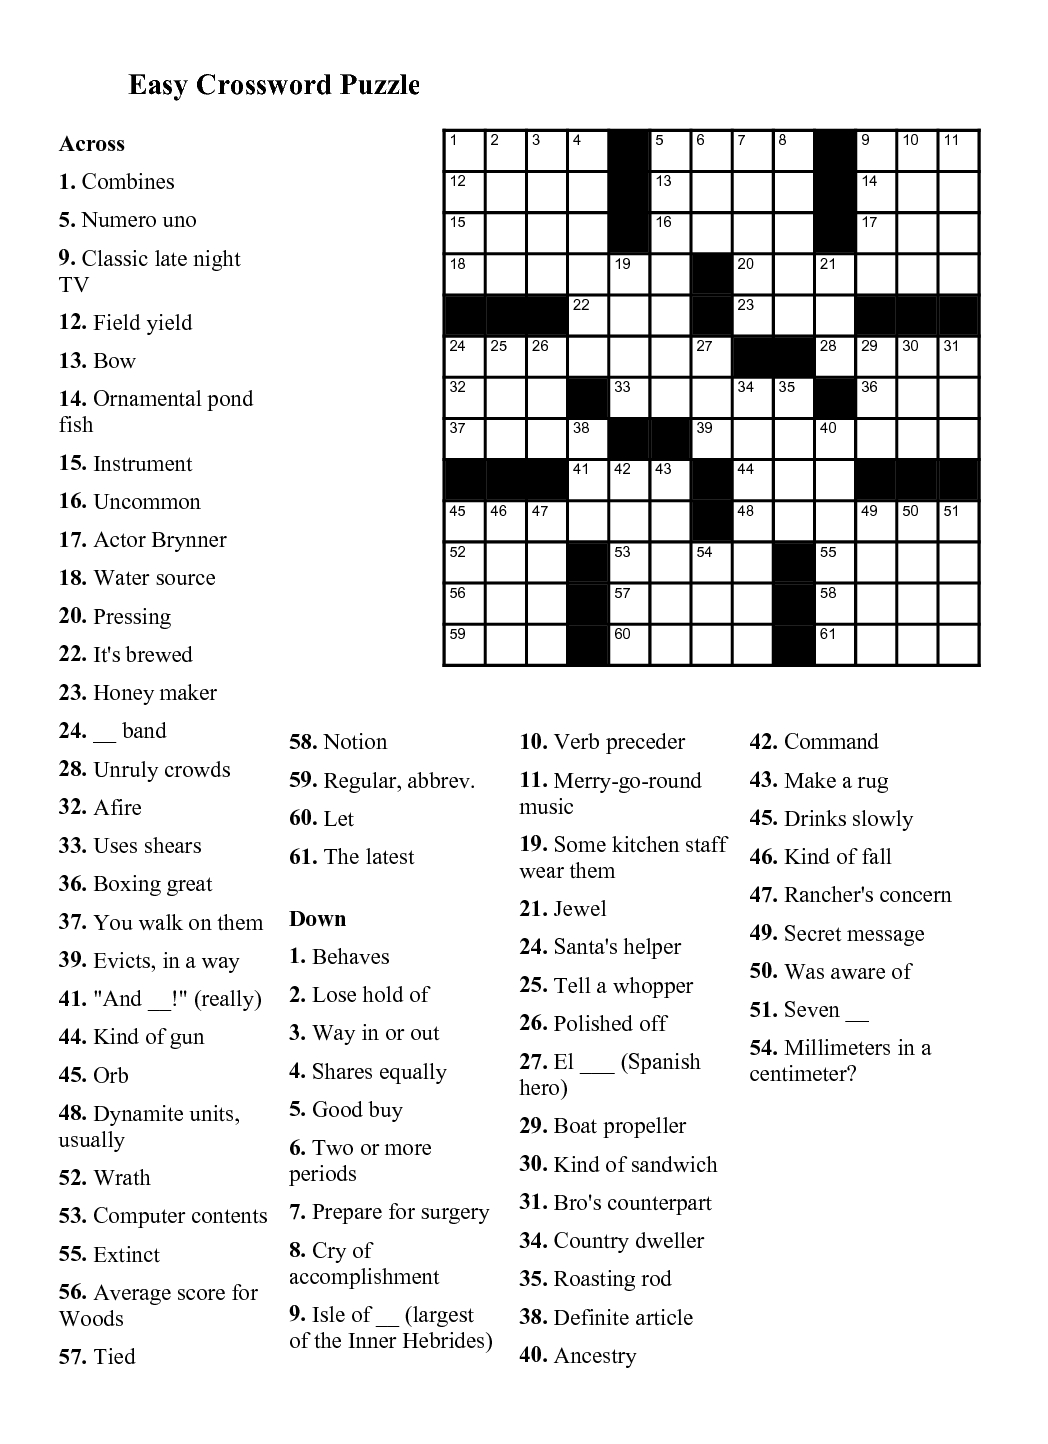 Easy Crossword Puzzles Printable Daily Template - Printable Crossword Puzzles In Spanish